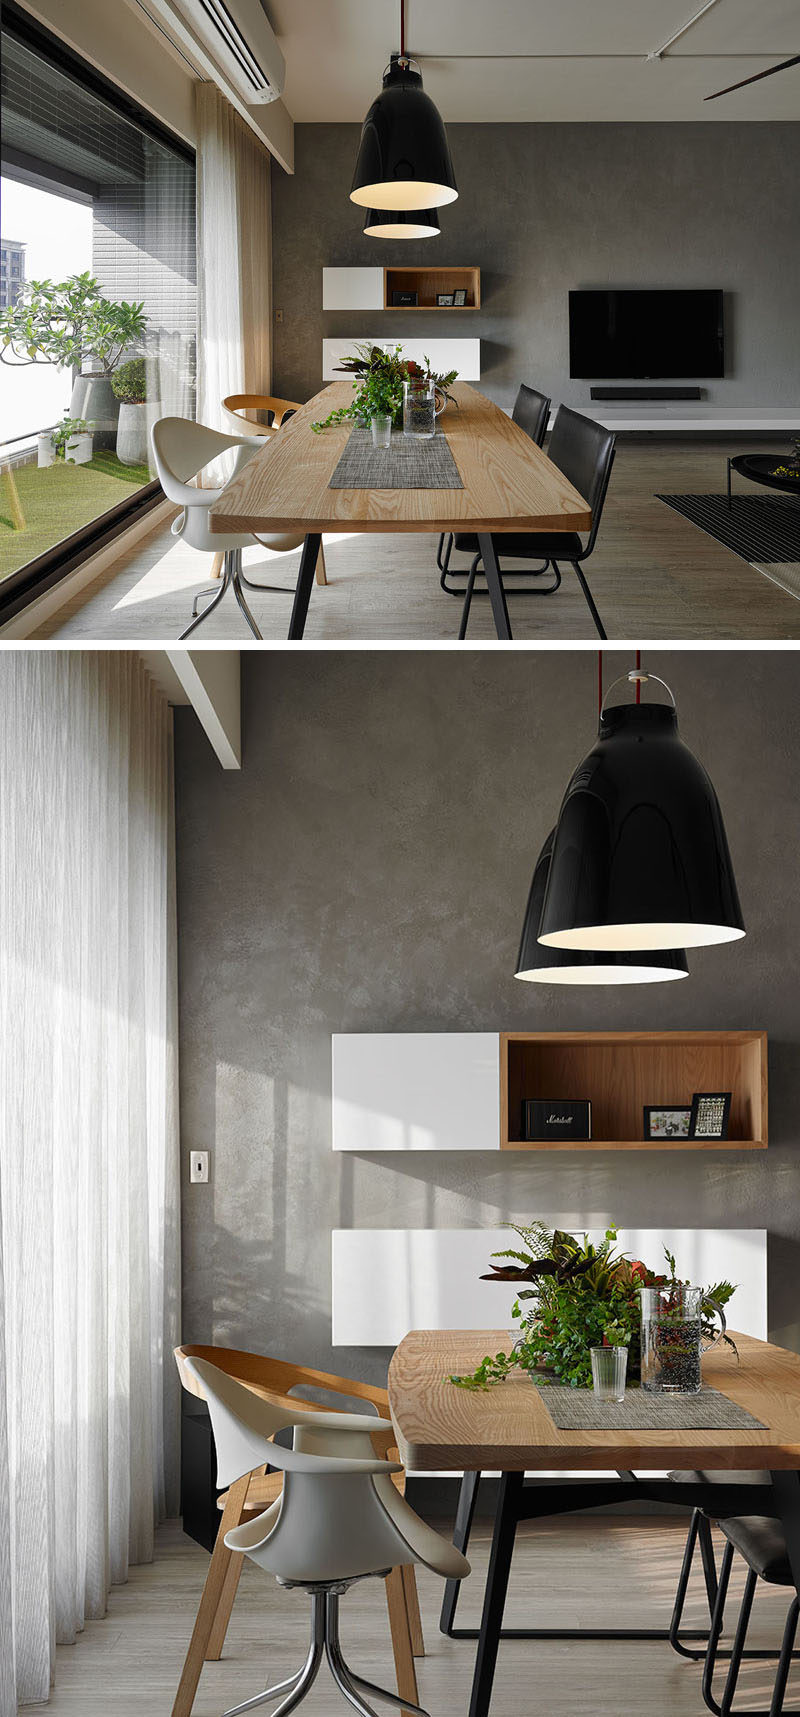 This dining room has been positioned next to the window and small balcony, taking advantage of the light.